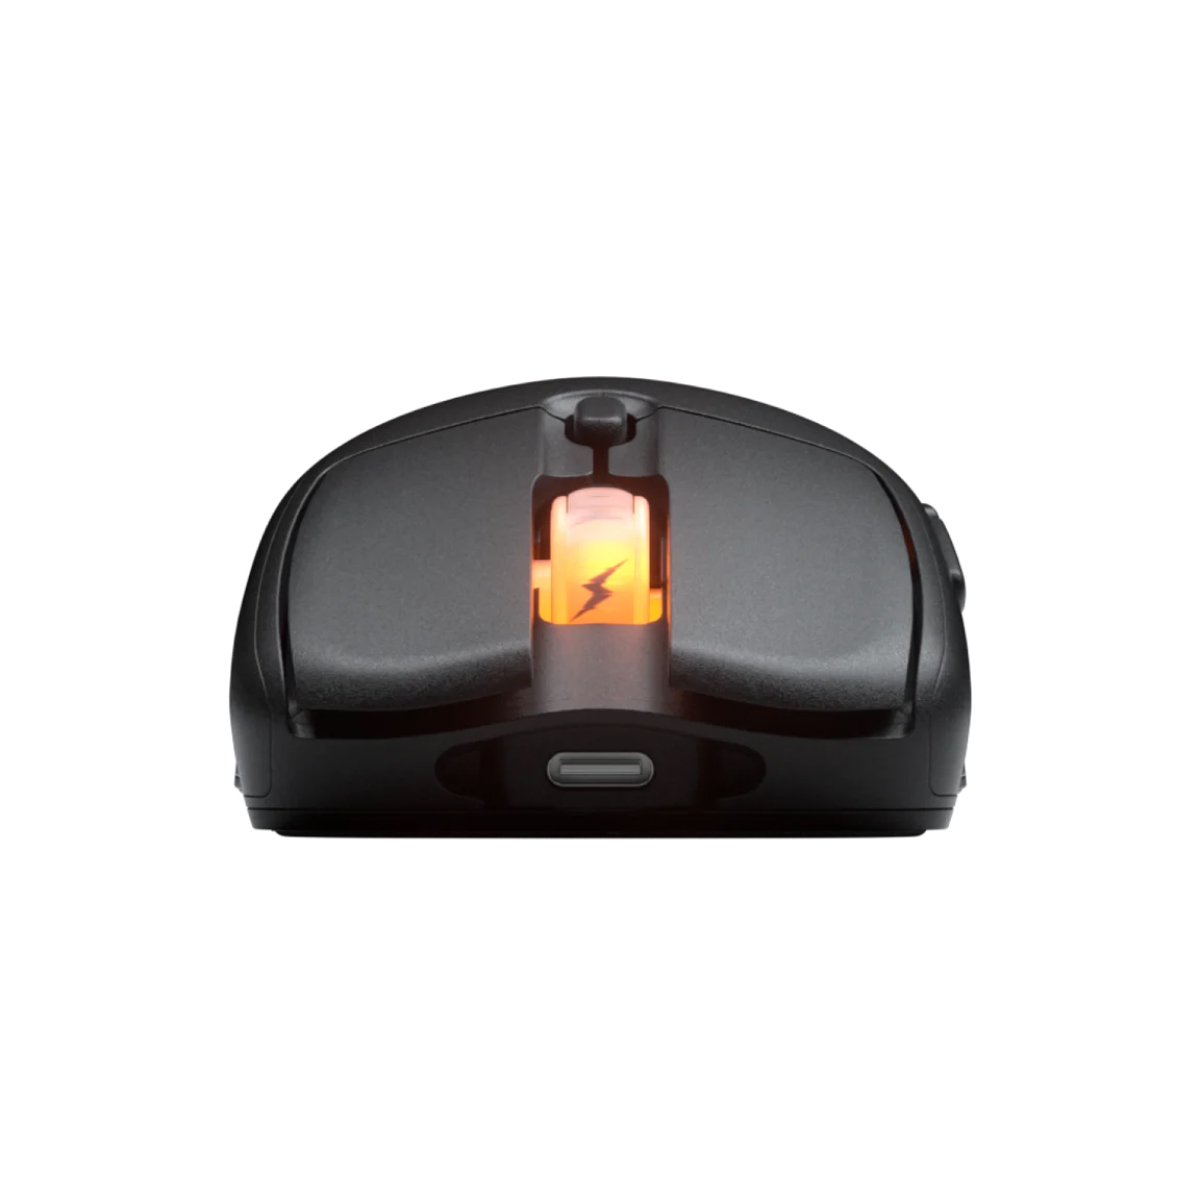 Fnatic - Fnatic Bolt Wireless RGB Optical Gaming Mouse - Black (MS0003-001)